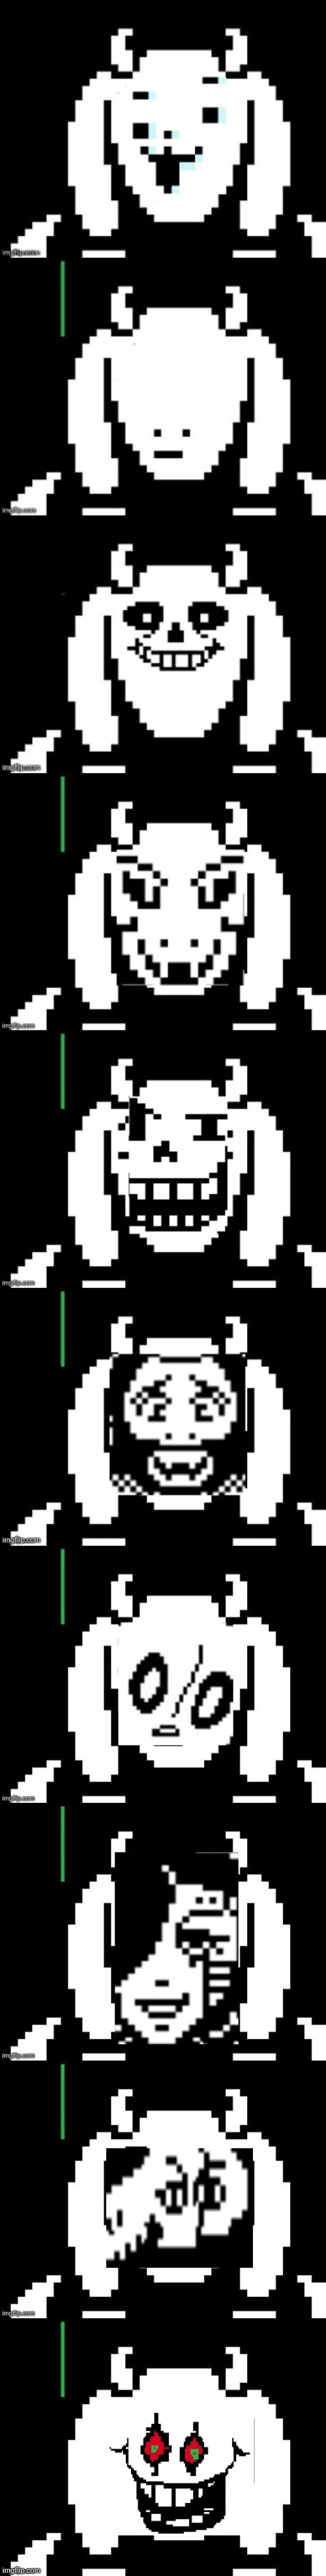 Even more cursef | image tagged in toriel,cursed | made w/ Imgflip meme maker